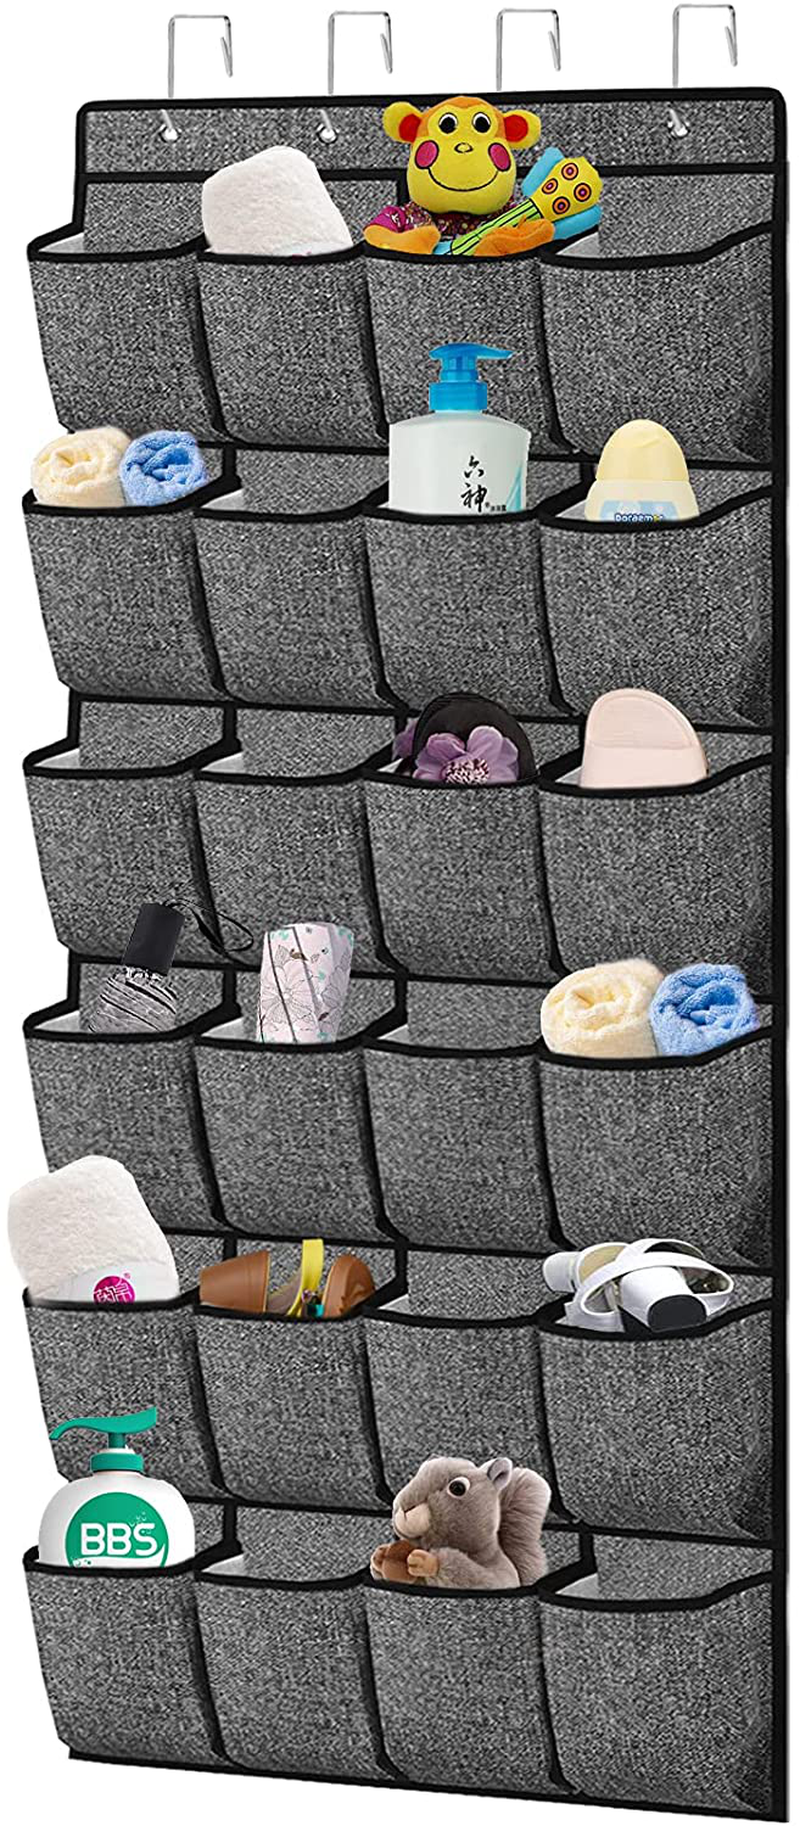 Over the Door Shoe Organizer,Hanging Shoe Holder with 24 Extra Large Fabric Pockets for Storage Men Sneakers,Women High Heeled Shoes,Slippers Grey 61.4''x22''